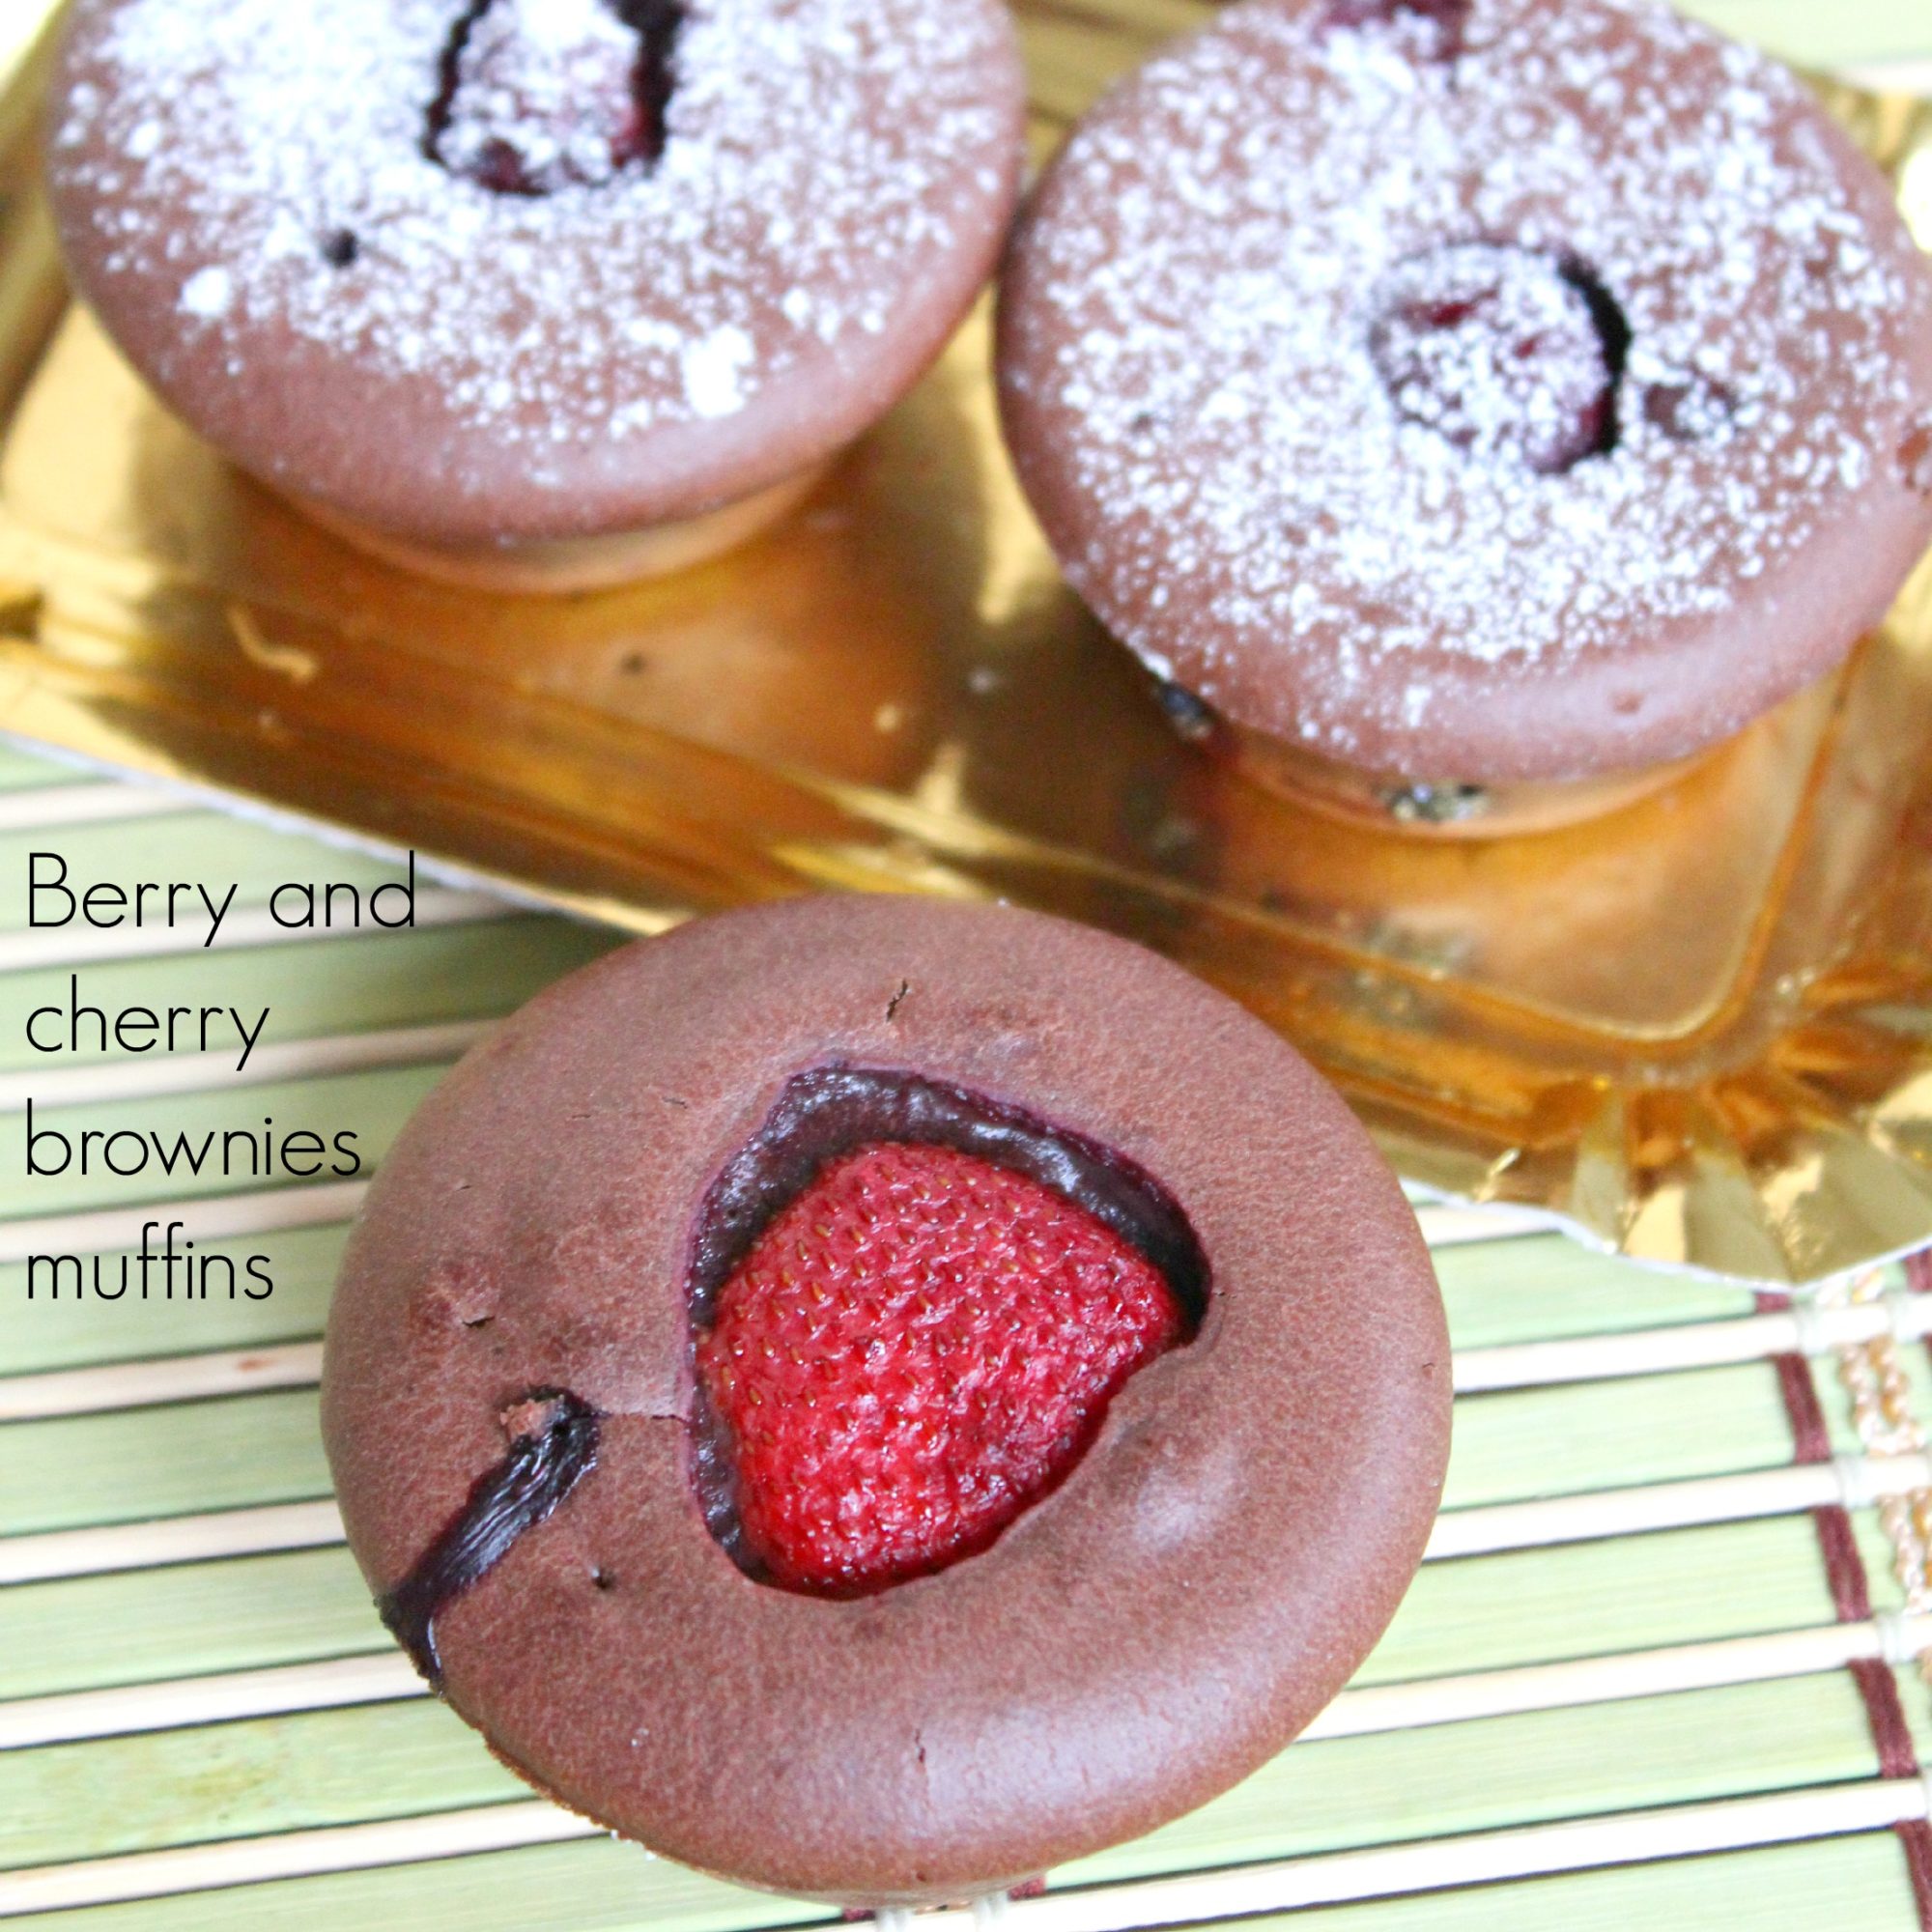 Berry and cherry brownies muffins